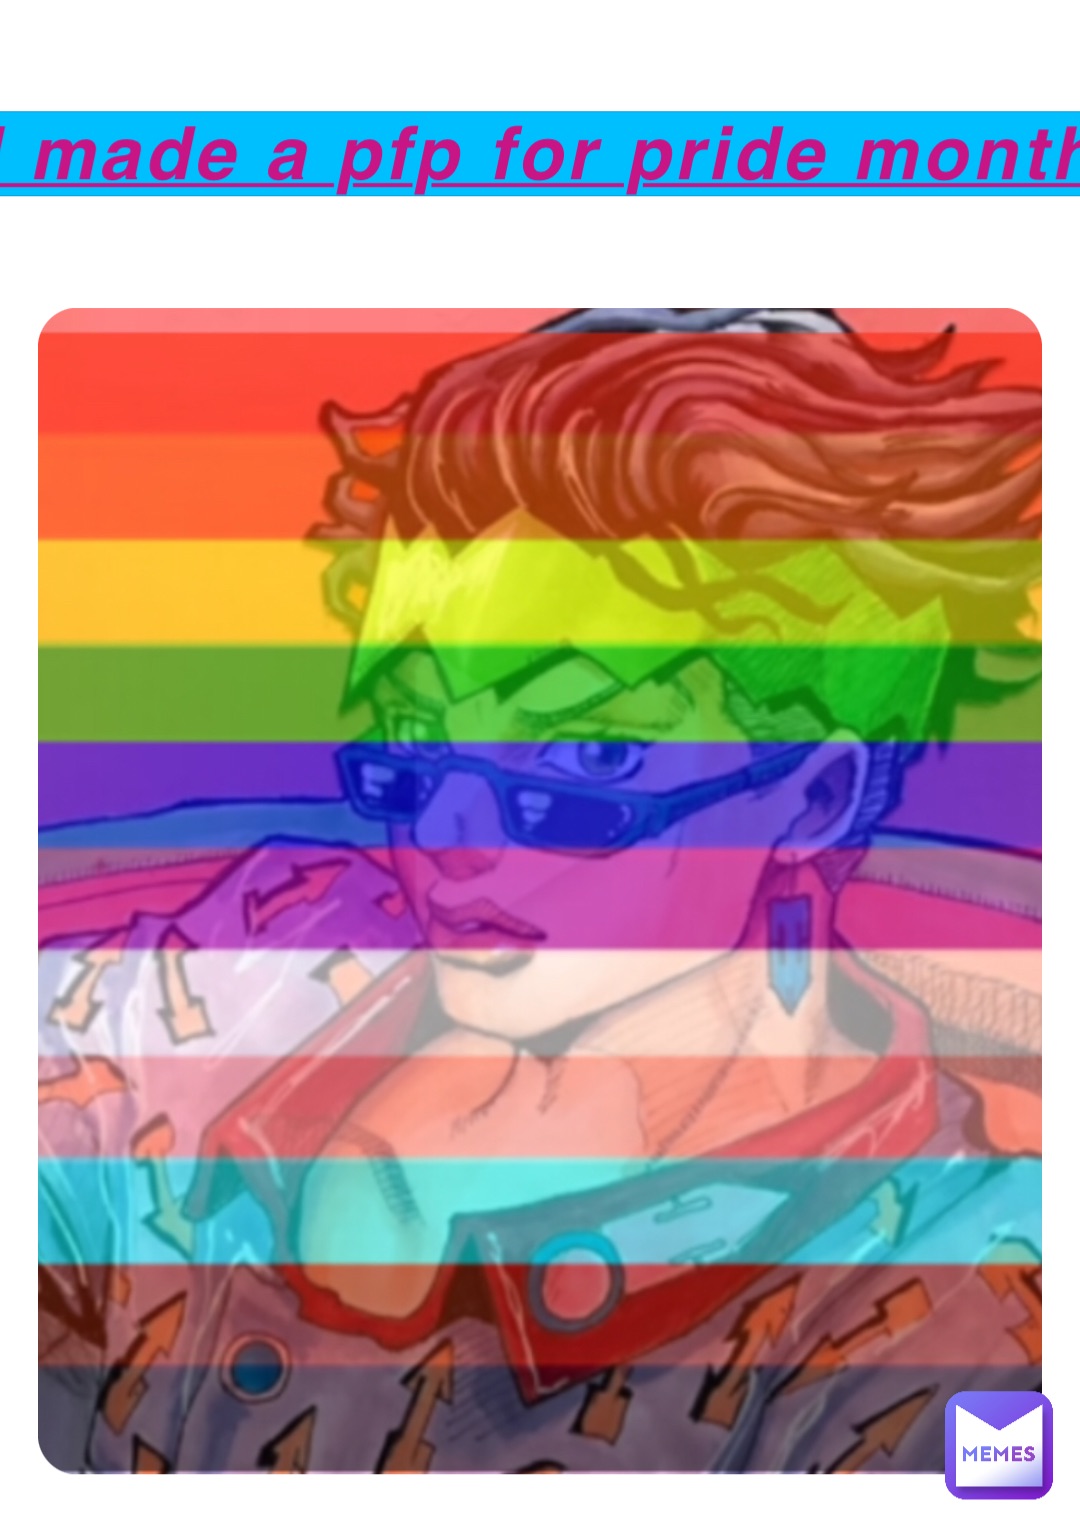 I made a pfp for pride month